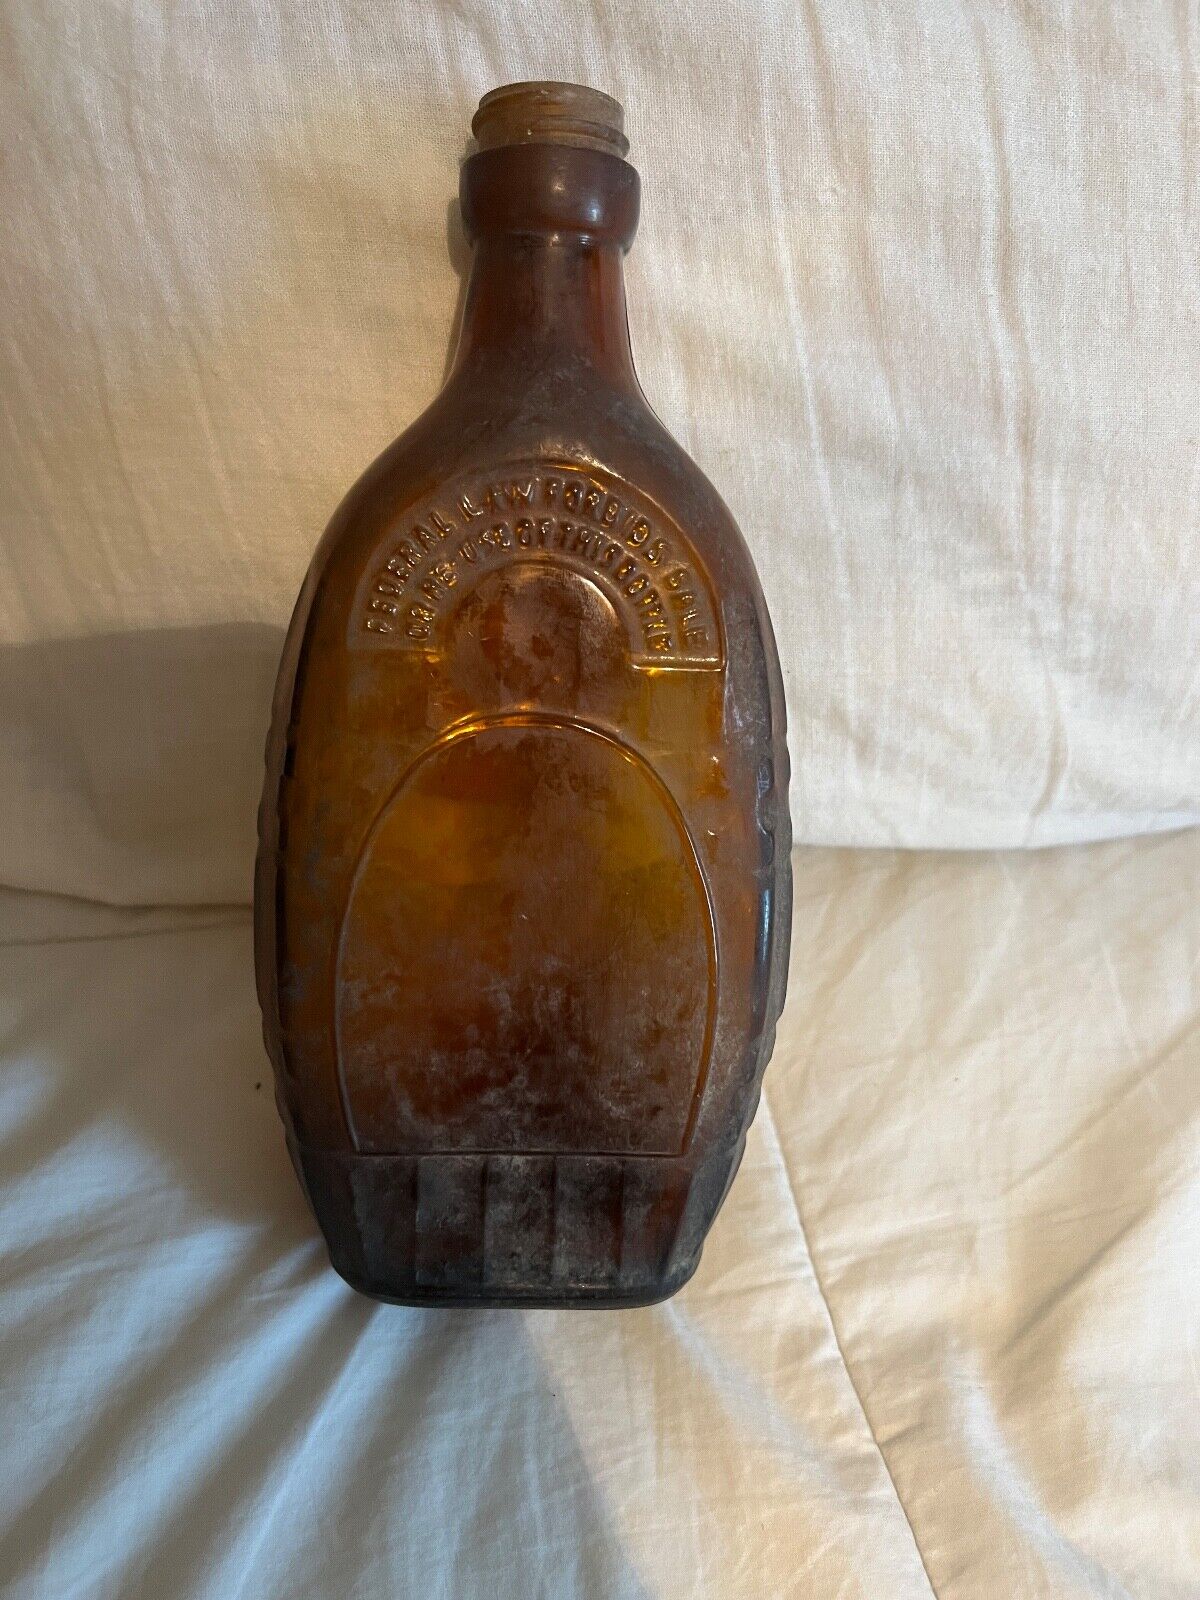 Prohibition Era Federal Law Prohibits Sale or Reuse of this Bottle Liquor 1930s